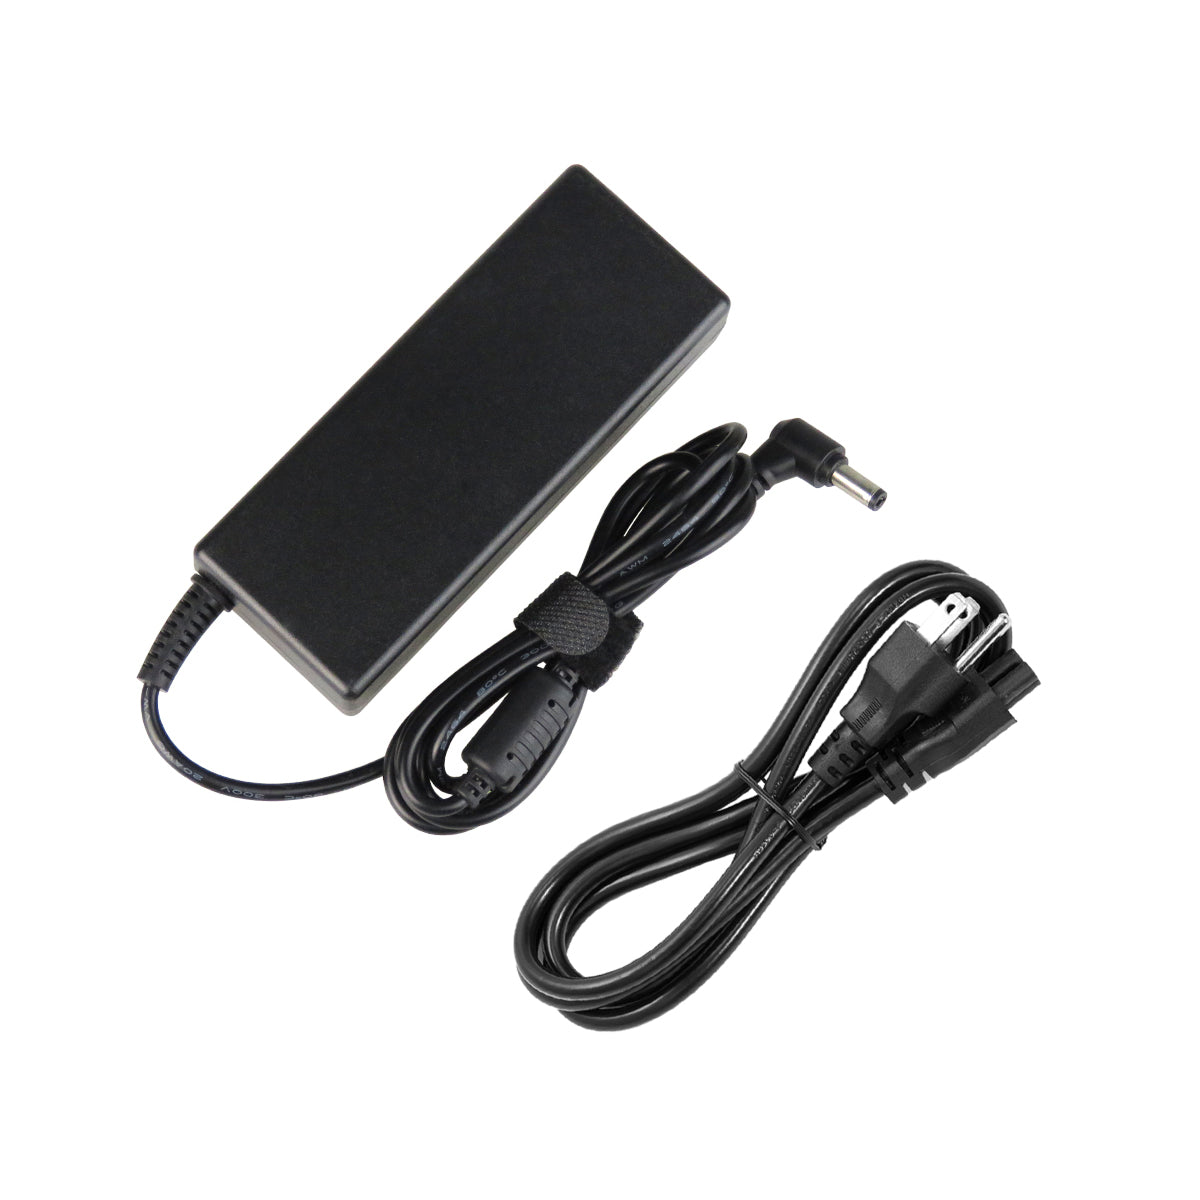 AC Adapter Charger for ASUS K55A Notebook.